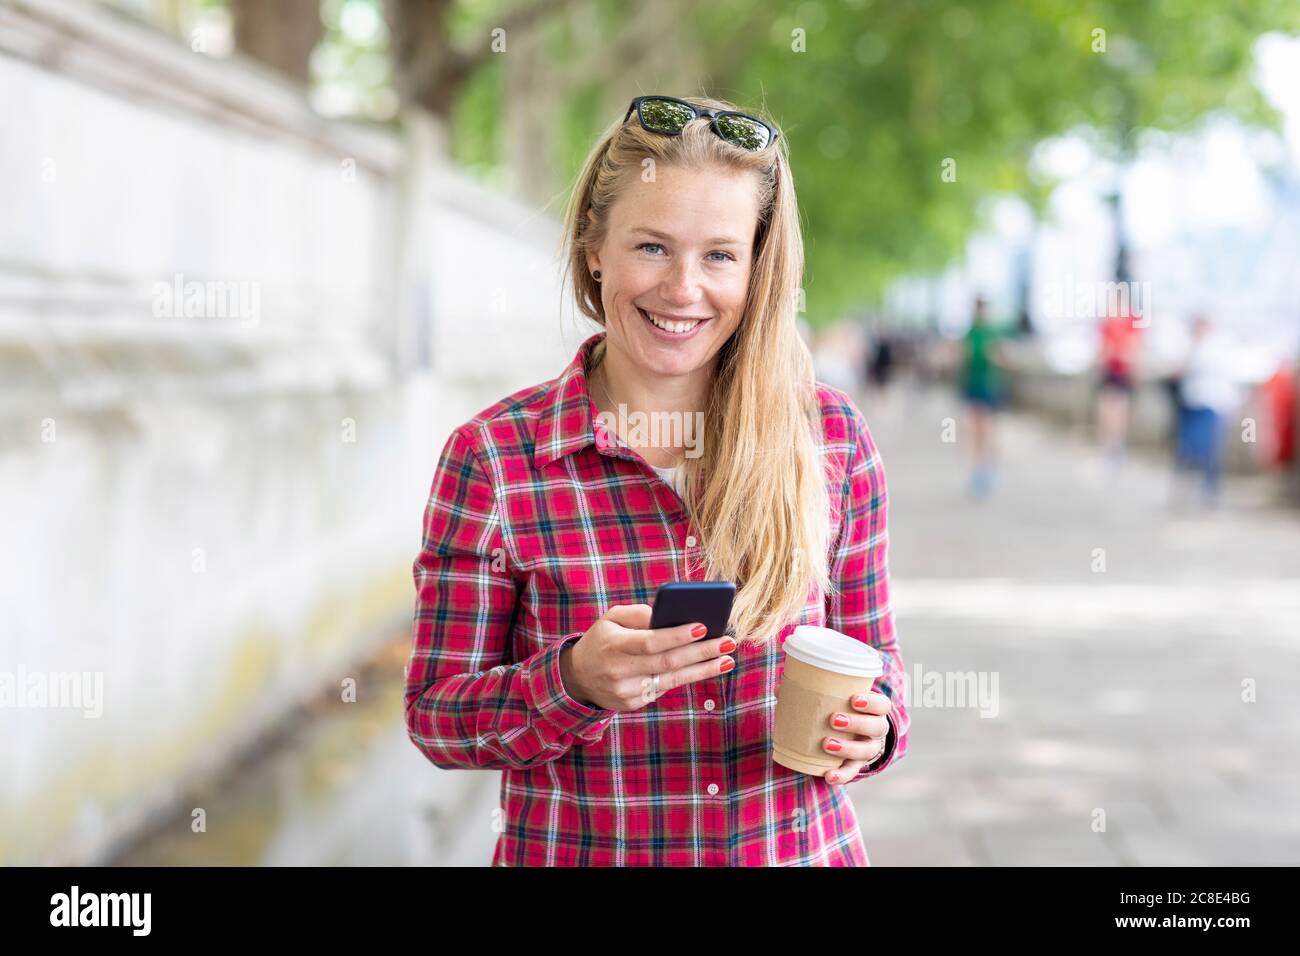 Smiling woman holding coffee using mobile phone while standing on footpath Stock Photo